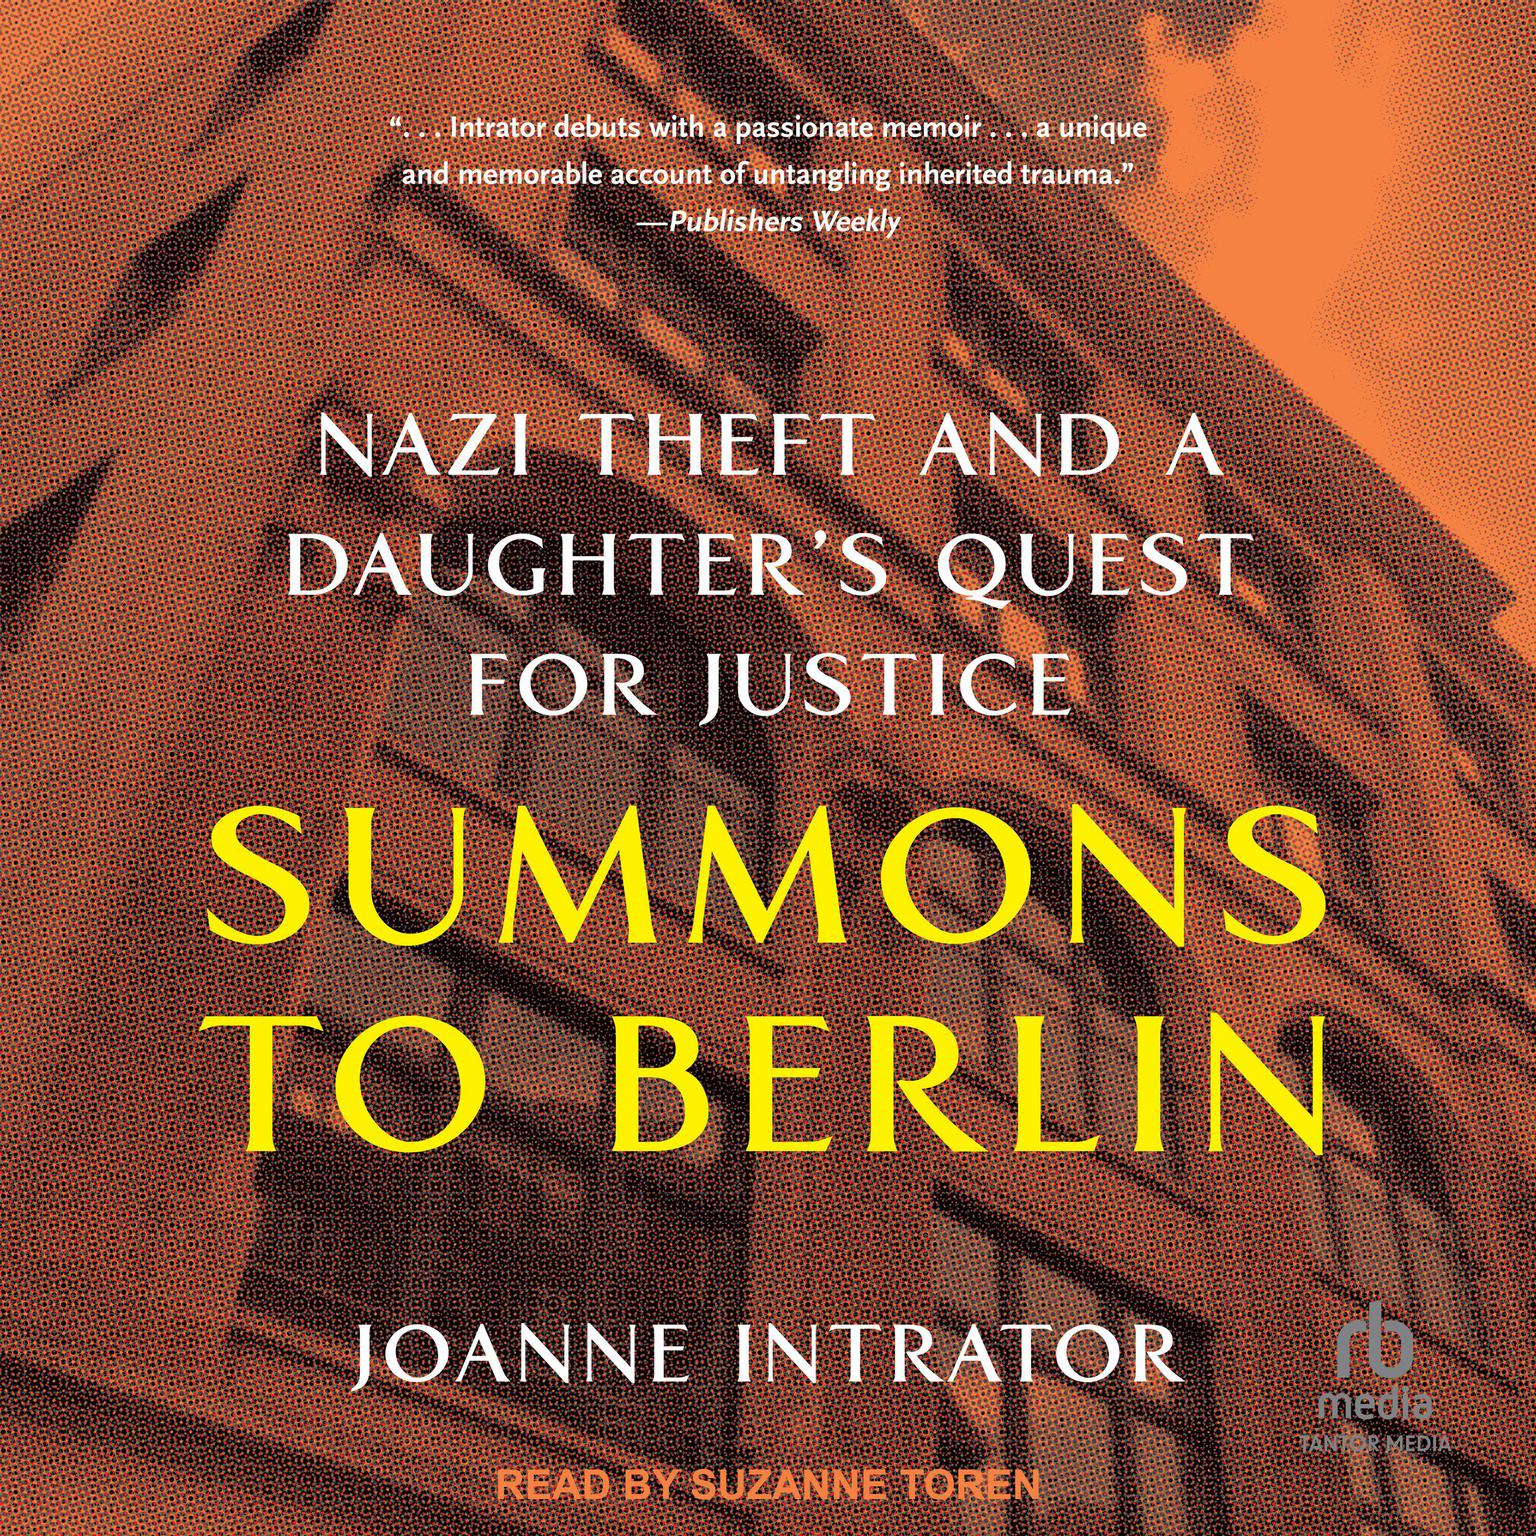 Summons to Berlin: Nazi Theft and A Daughters Quest for Justice Audiobook, by Joanne Intrator